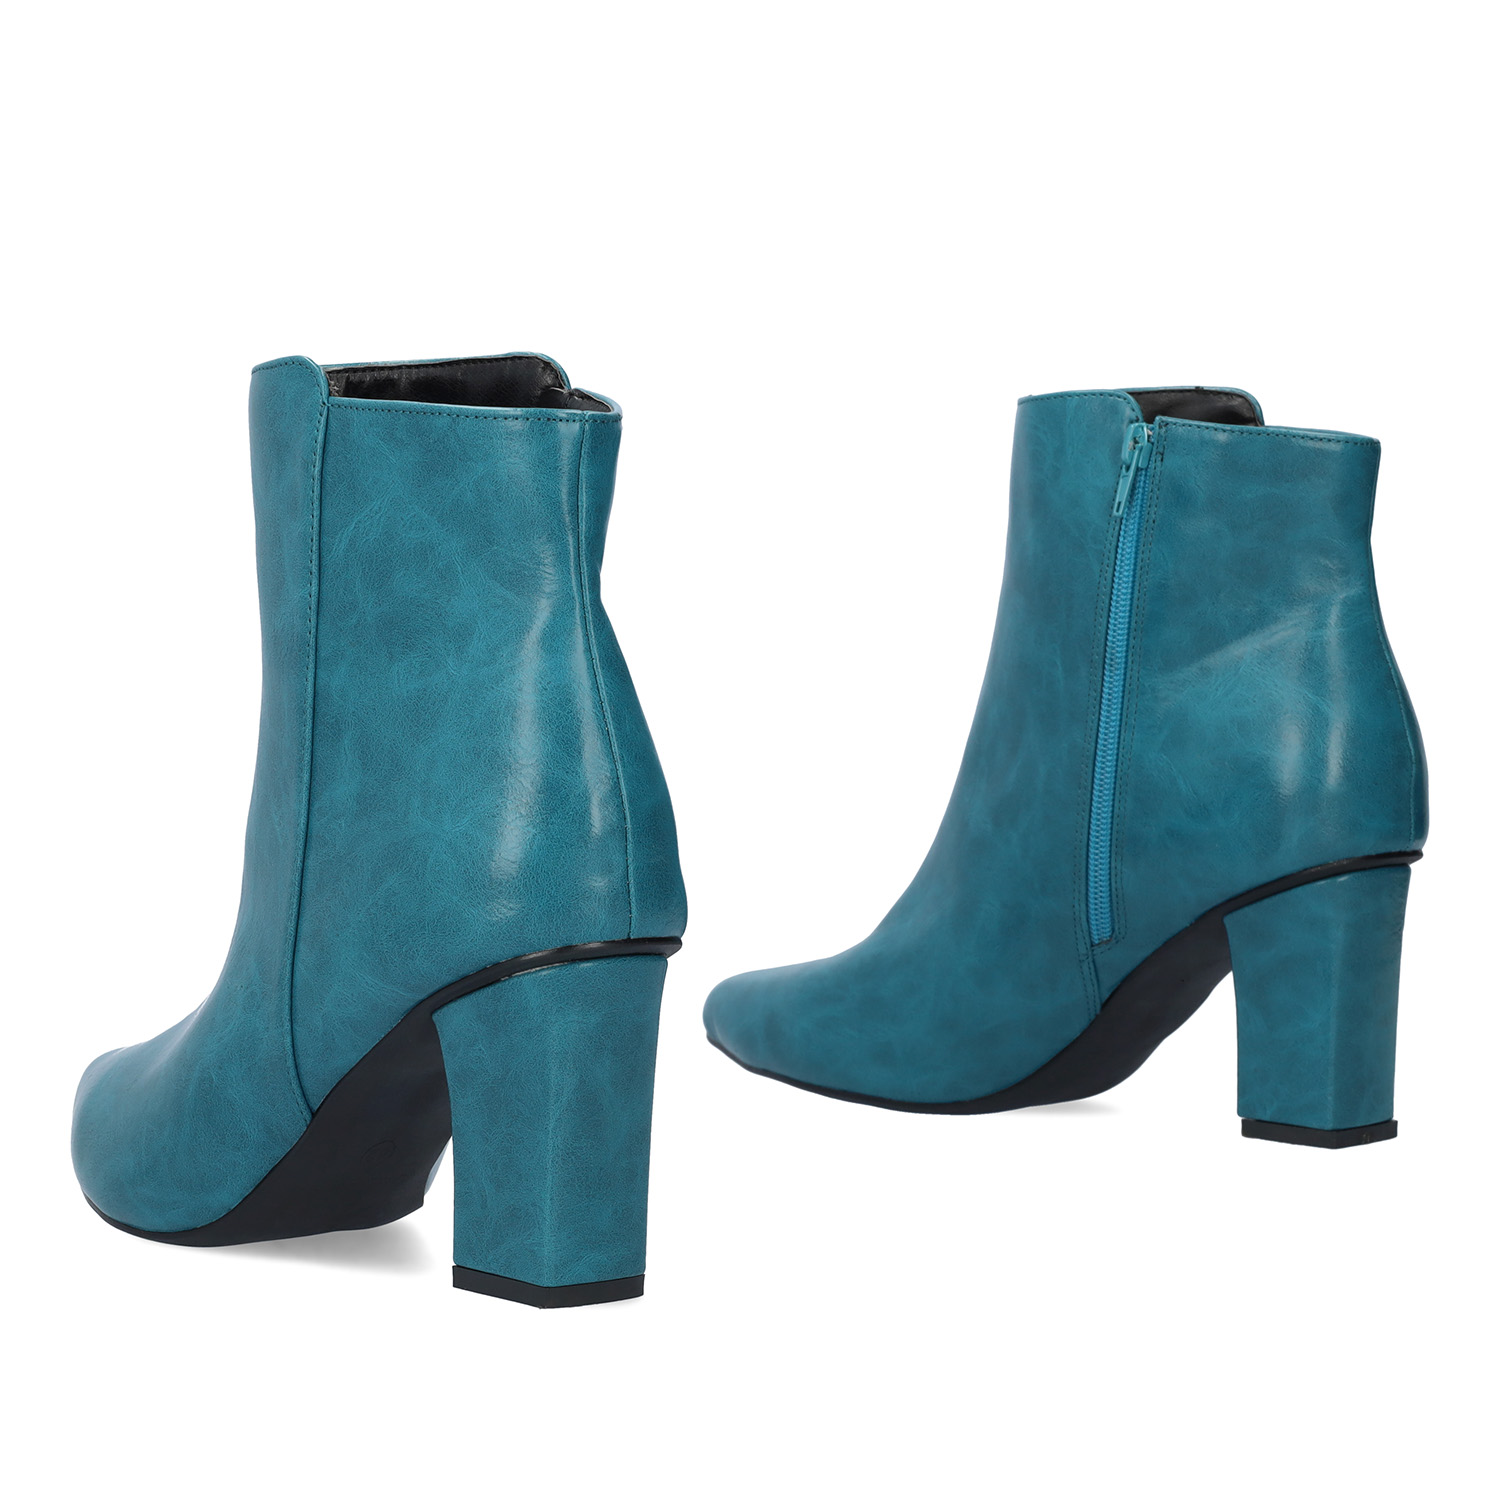 Heeled booties in blue faux leather. 